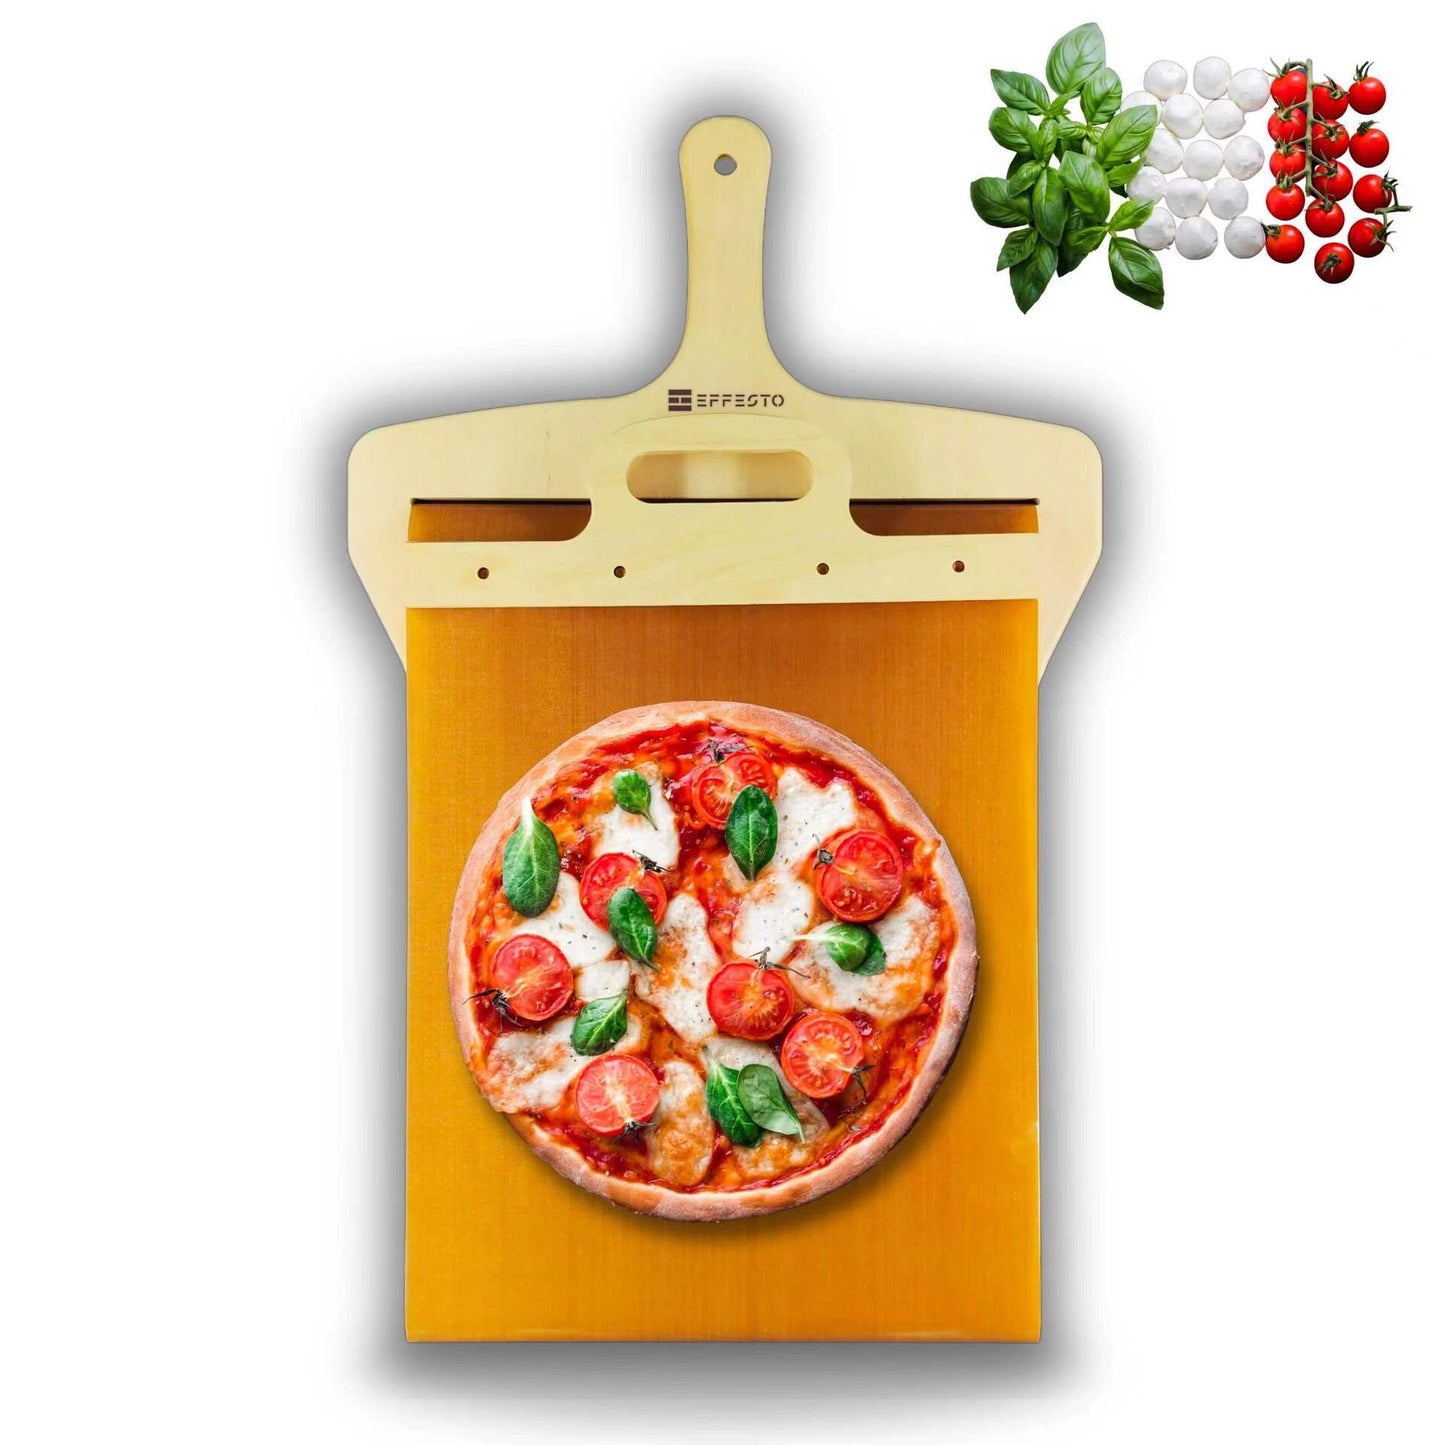 The Best Selling Wooden Pizza Transfer Shovel - Fast Free Shipping Worldwide